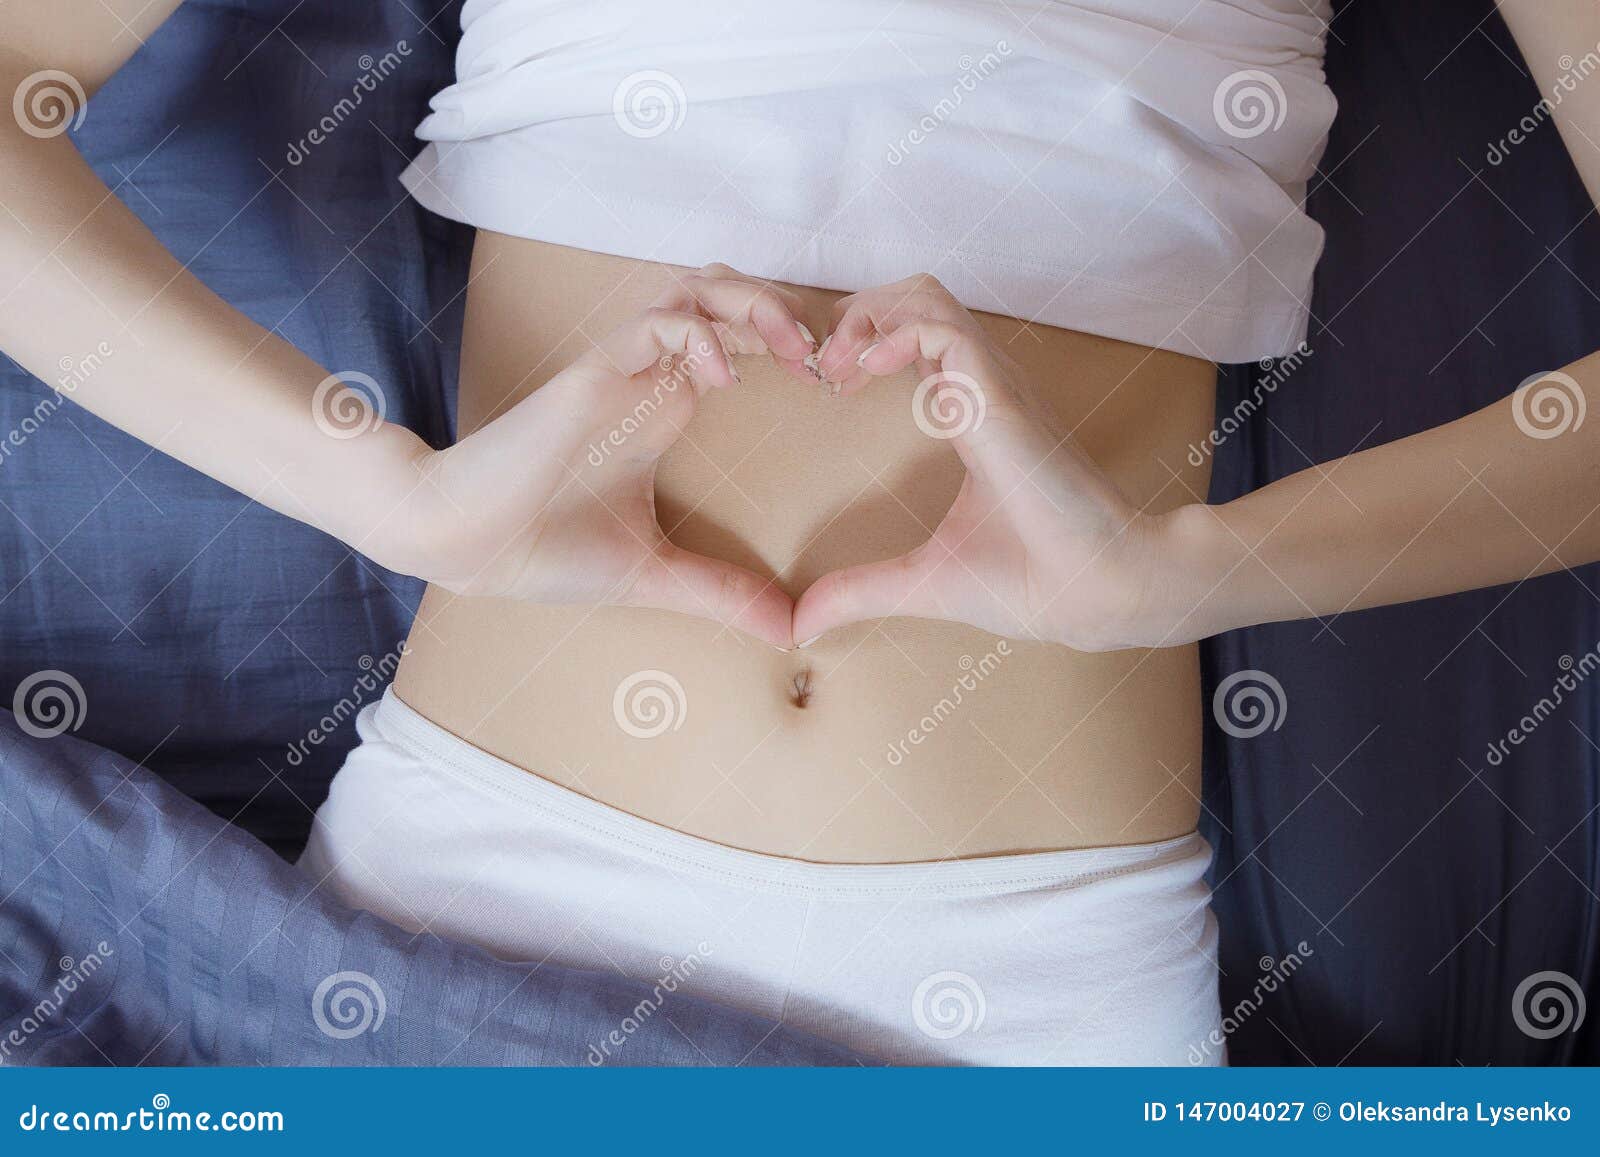 healthy nutrition and belly health concept. close up of woman flat stomach. girl in bed with hungry feeling. top view